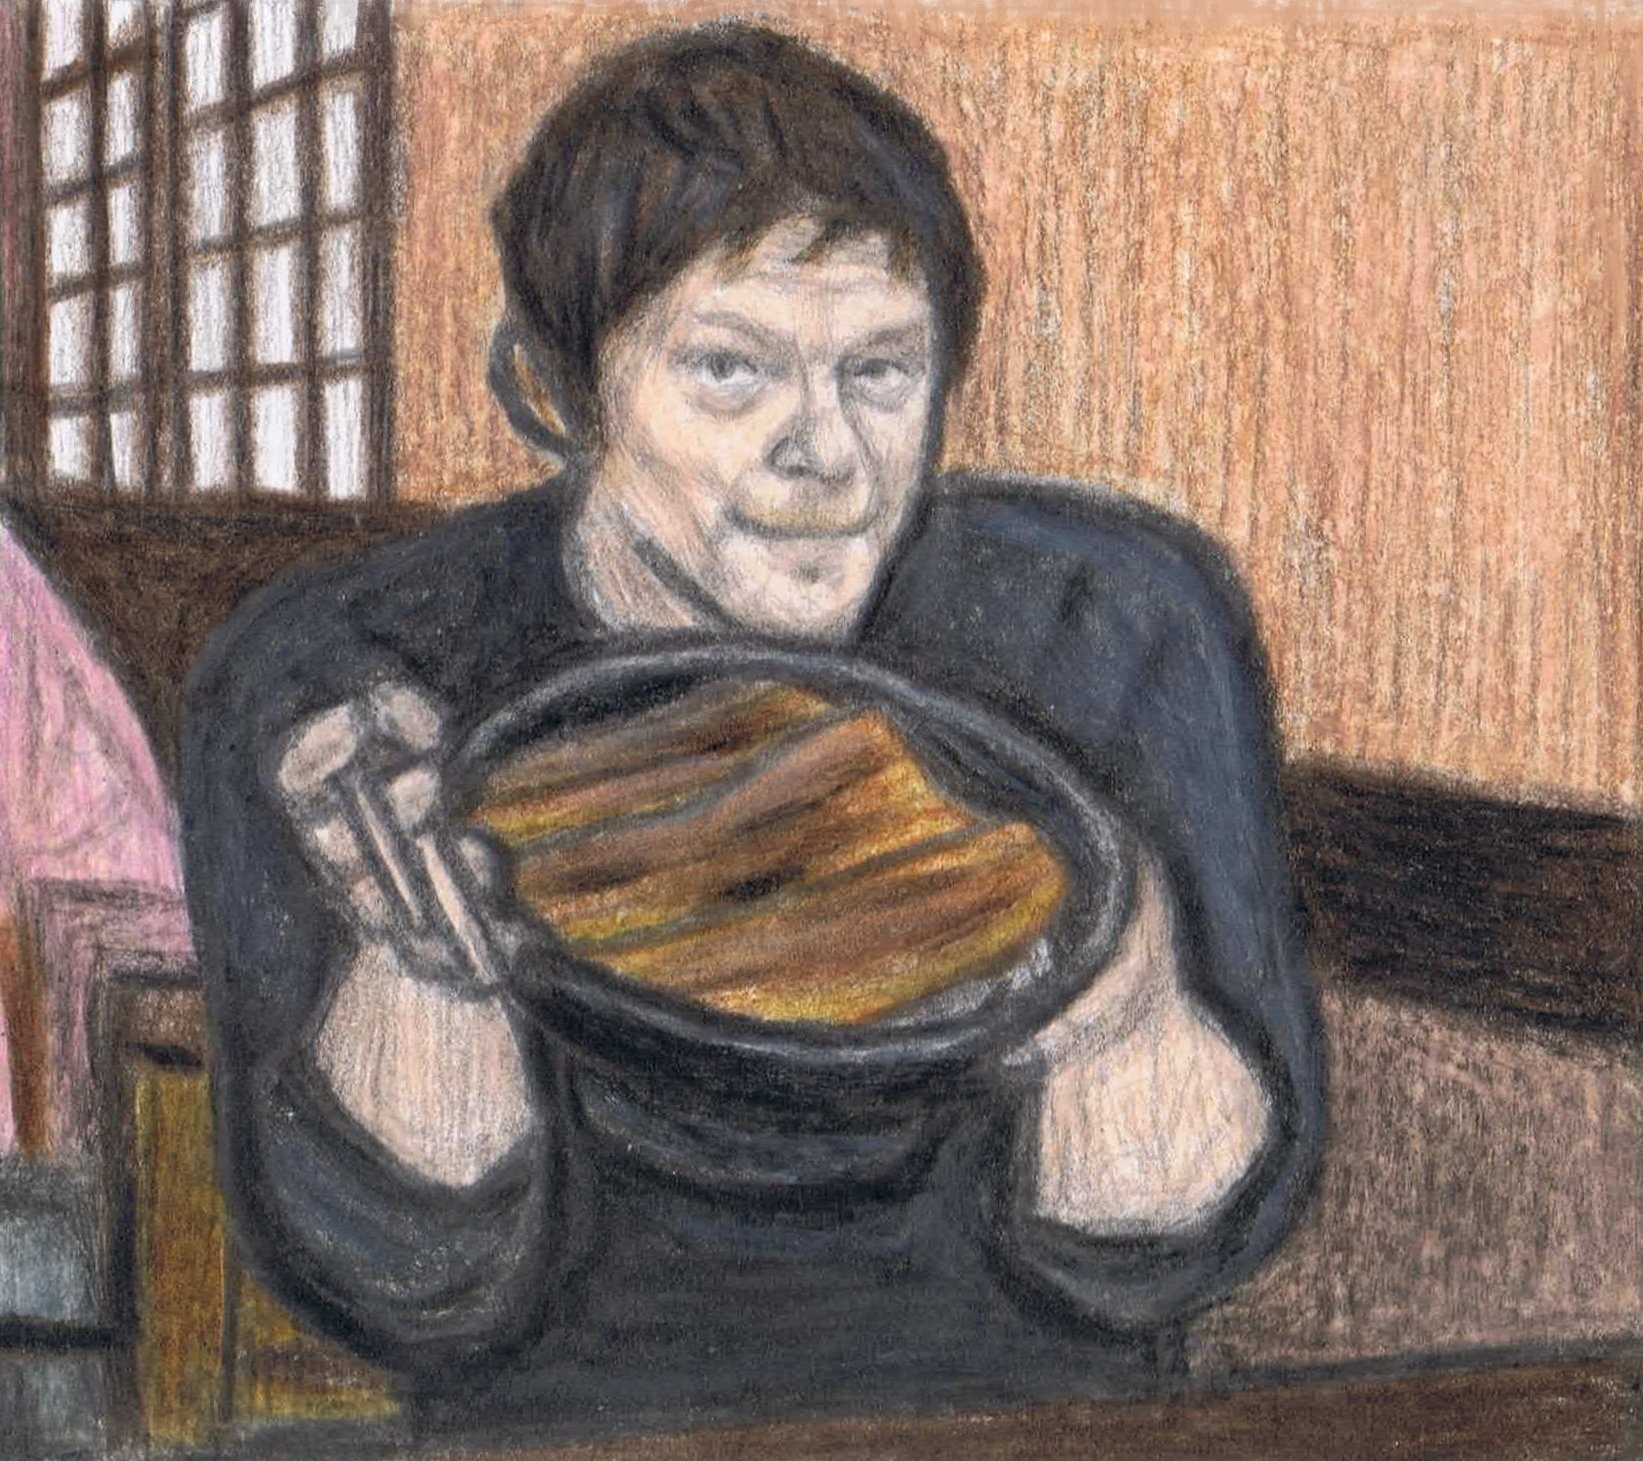 Norman Reedus eating eel and rice